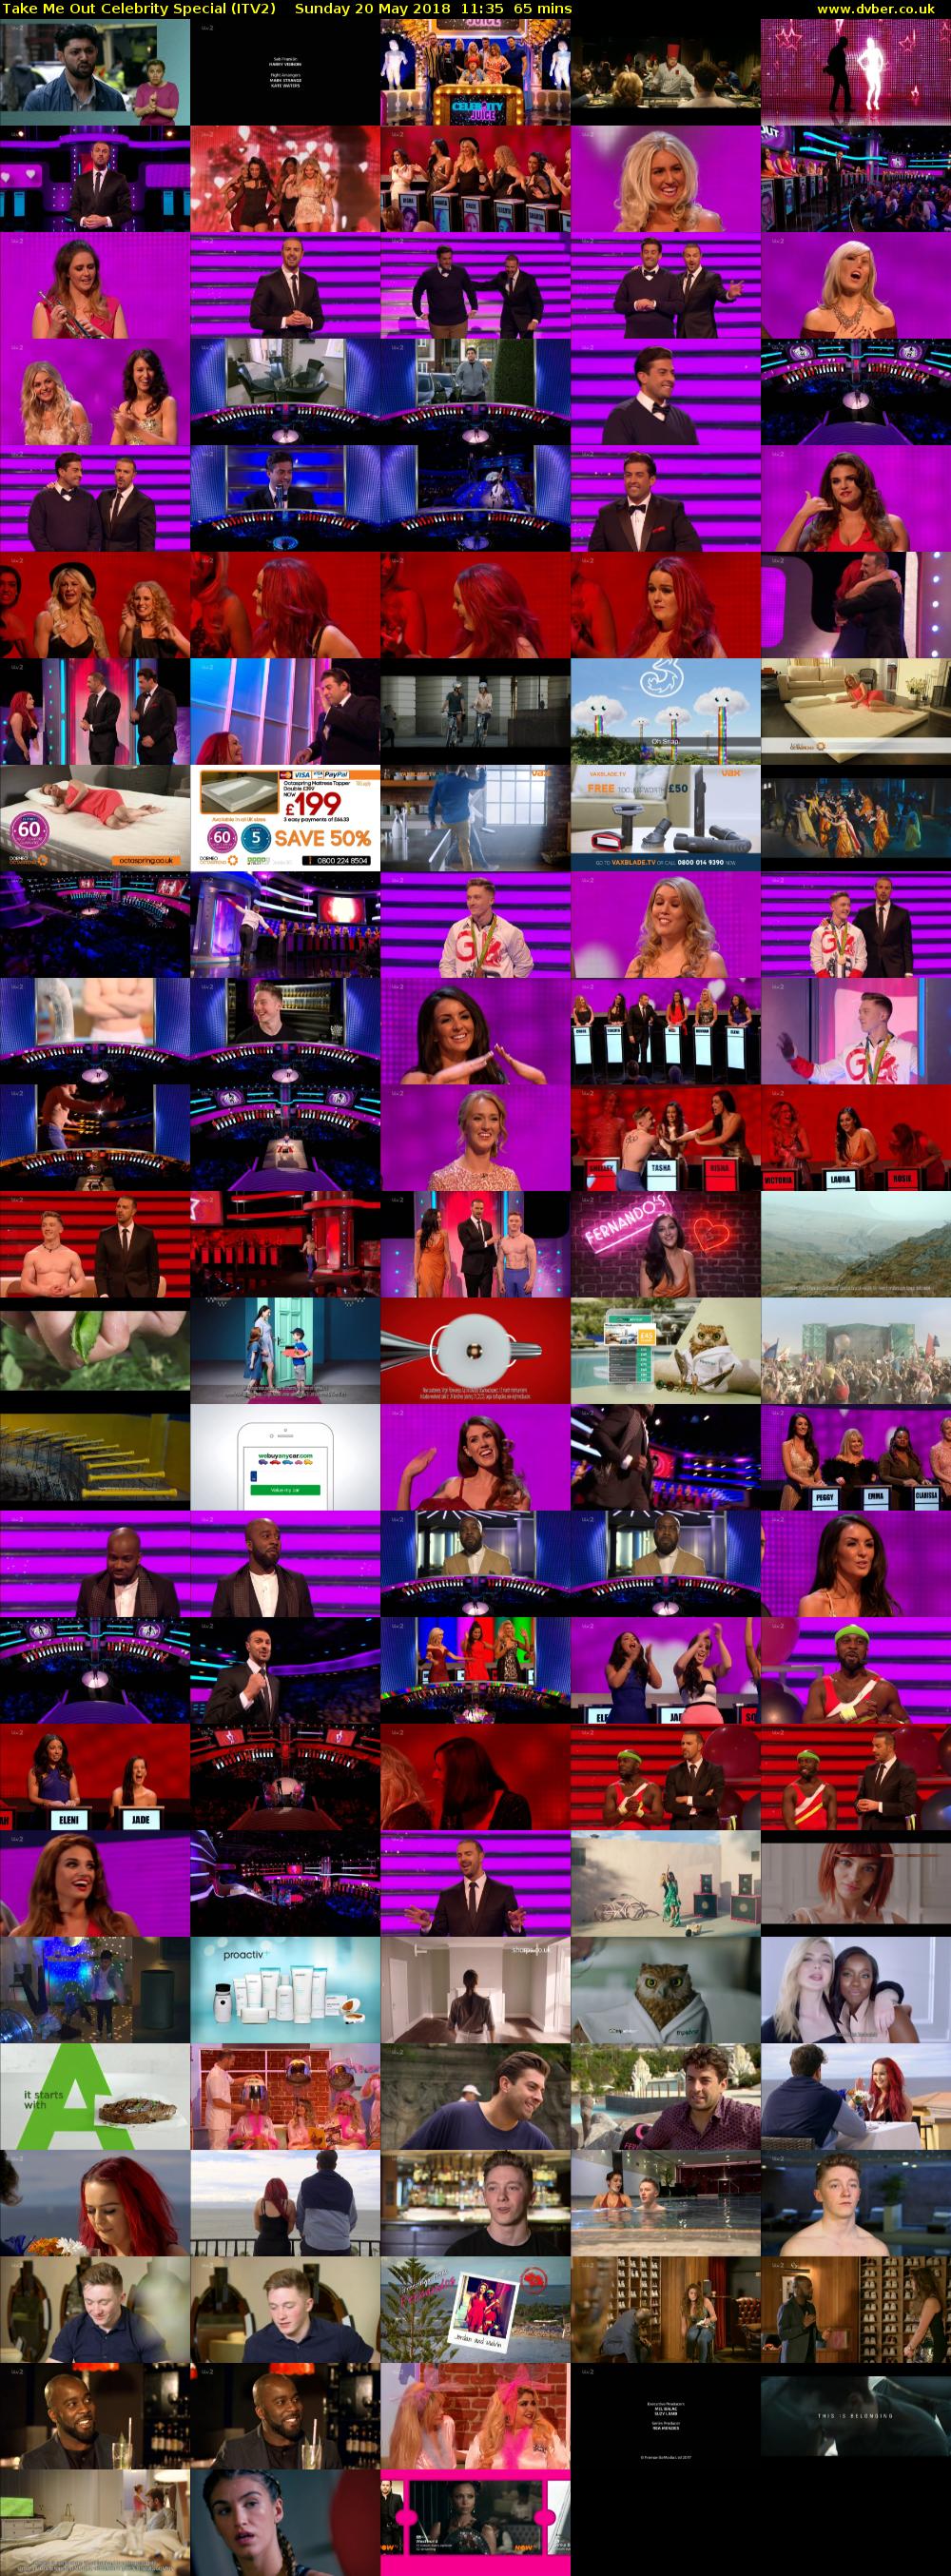 Take Me Out Celebrity Special (ITV2) Sunday 20 May 2018 11:35 - 12:40